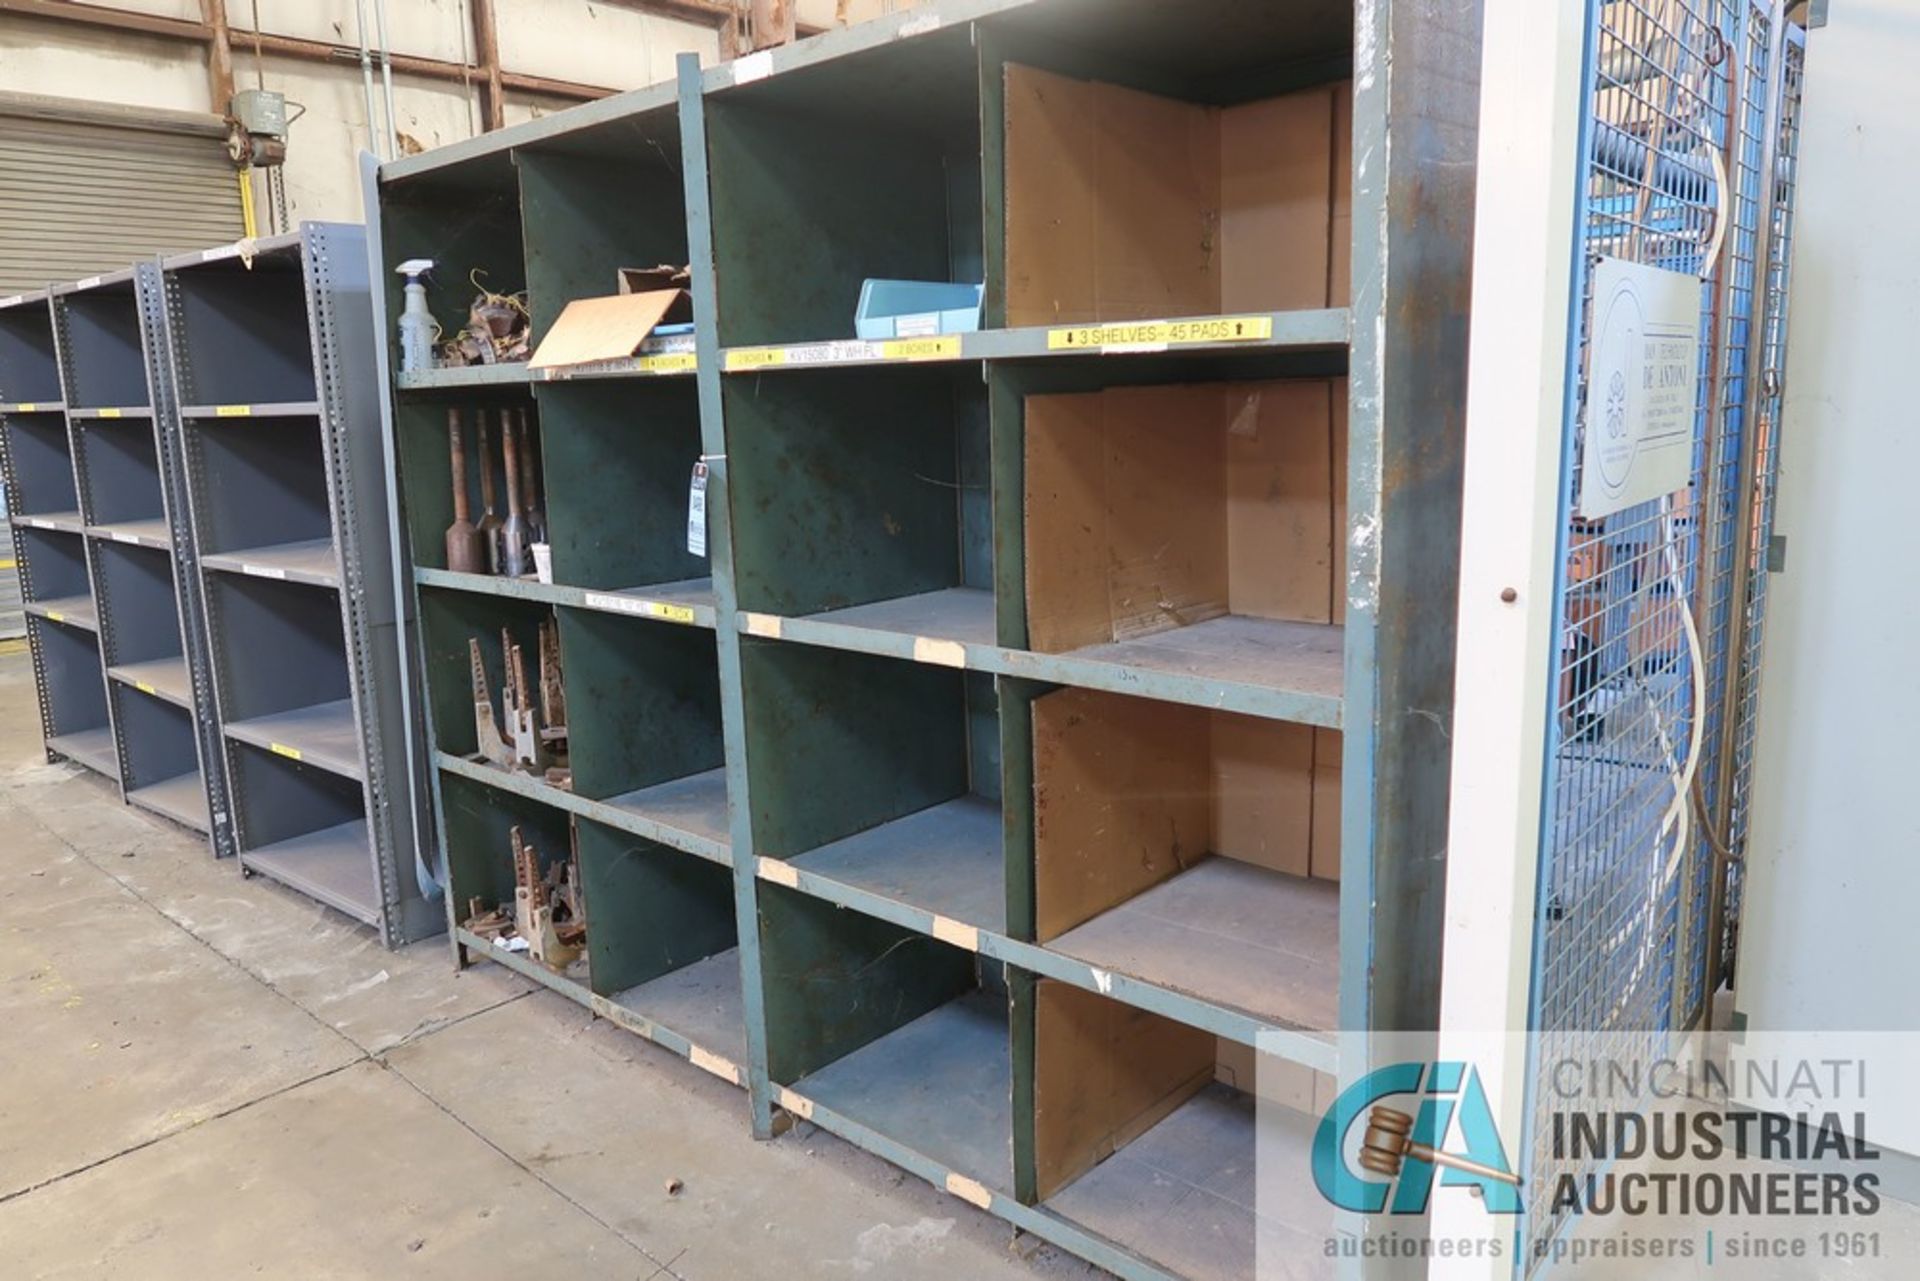 SECTION 24" X 96" X 78" HIGH SIXTEEN COMPARTMENT WELDED STEEL PIGEON HOLE RACK